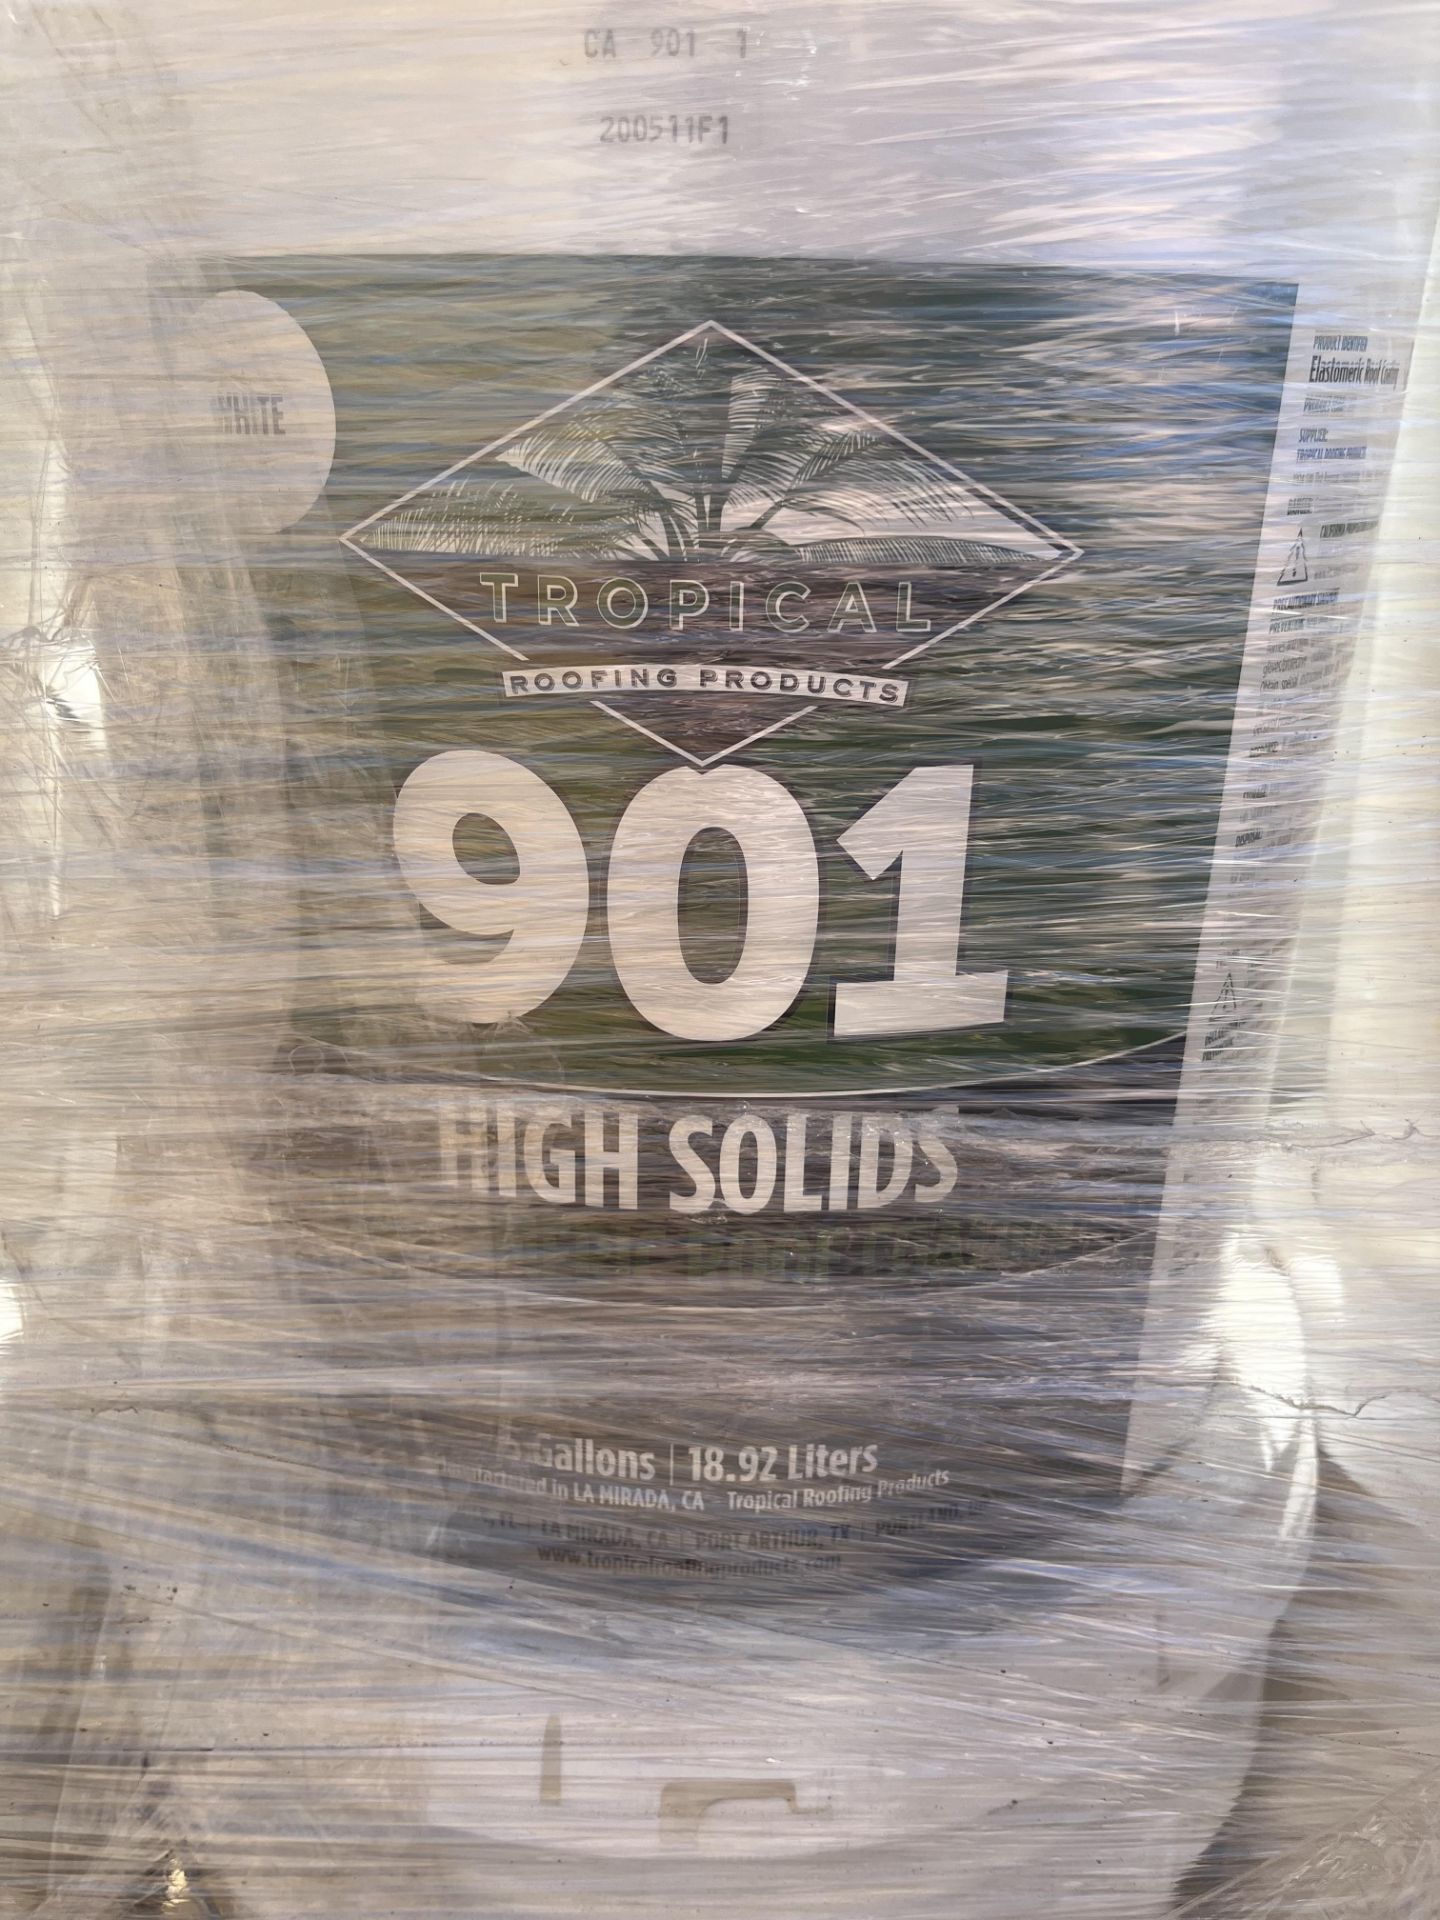 LOT PALLET OF TROPICAL ROOFING PRODUCTS 901 HIGH SOLIDS ELASTOMERIC ROOF COATING, 5 GAL BUCKETS - Image 2 of 2